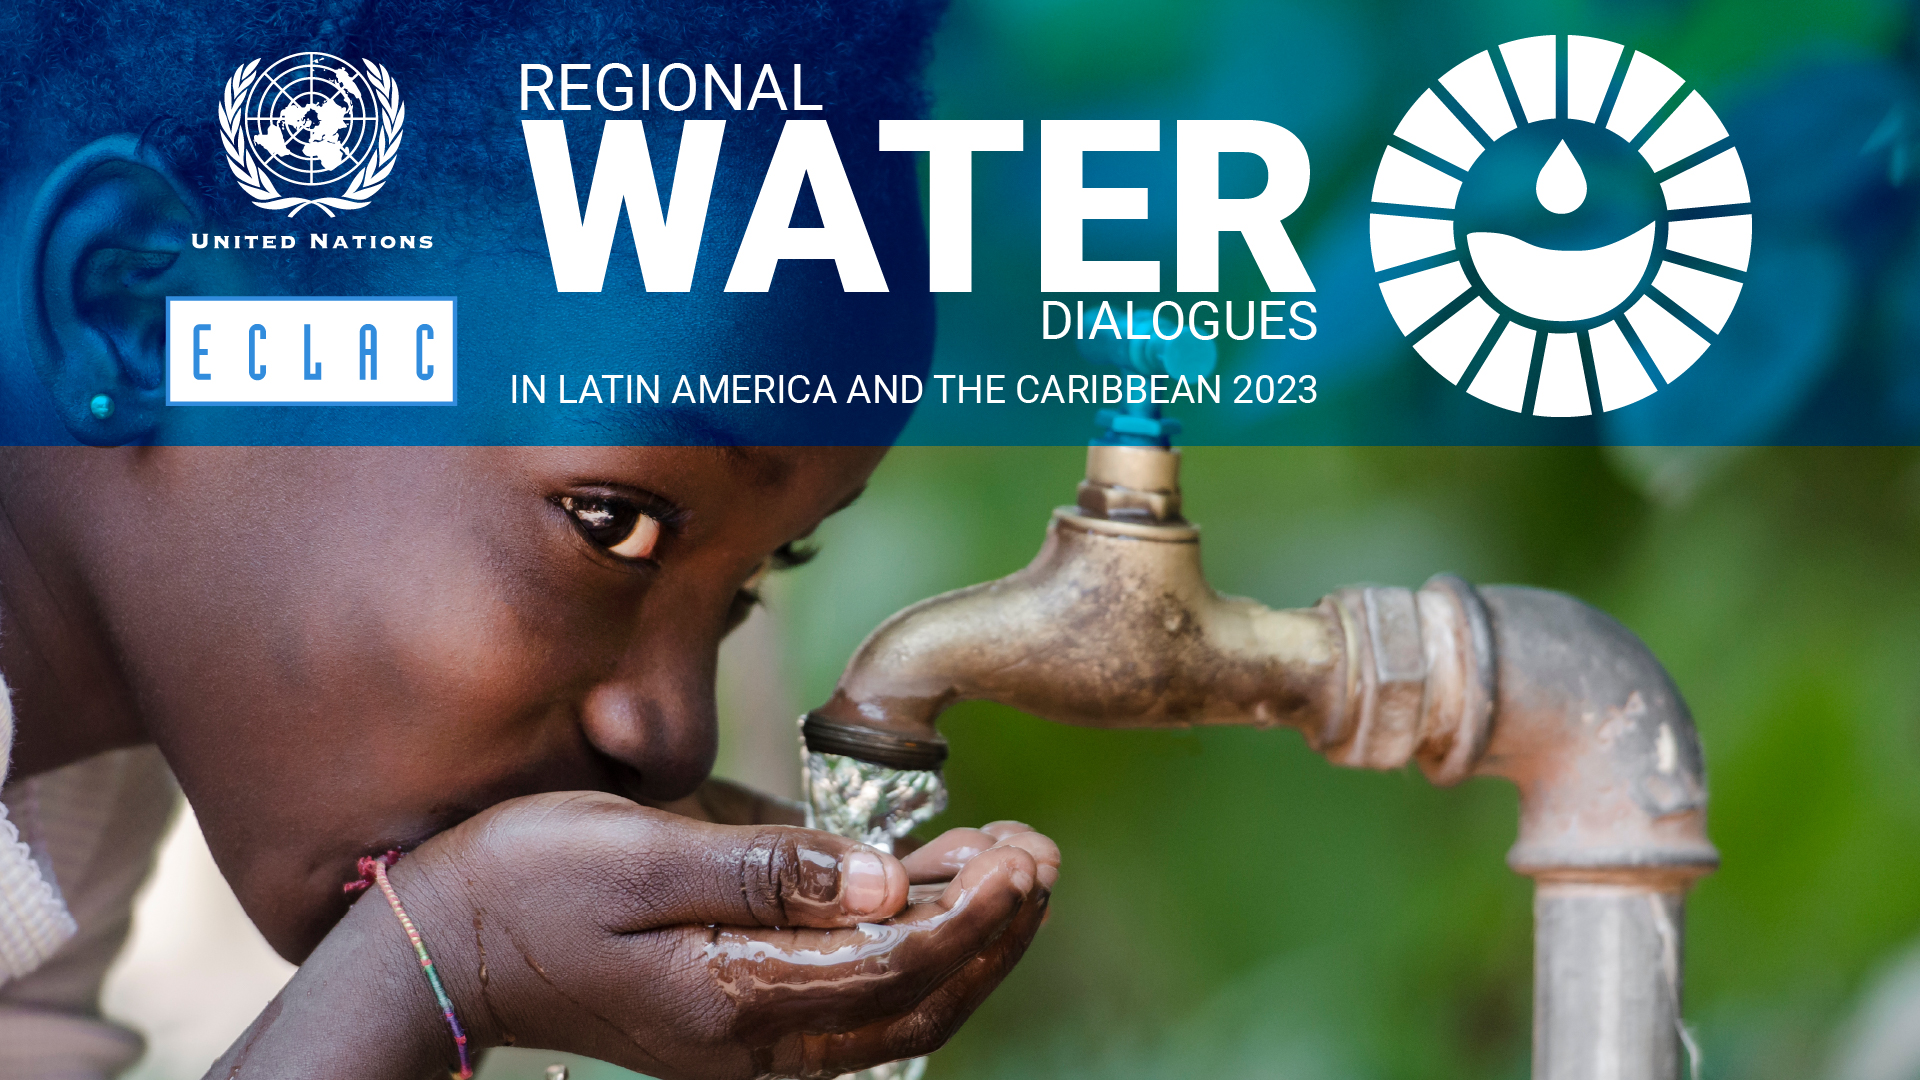 Regional Water Dialogues in Latin America and the Caribbean 2023